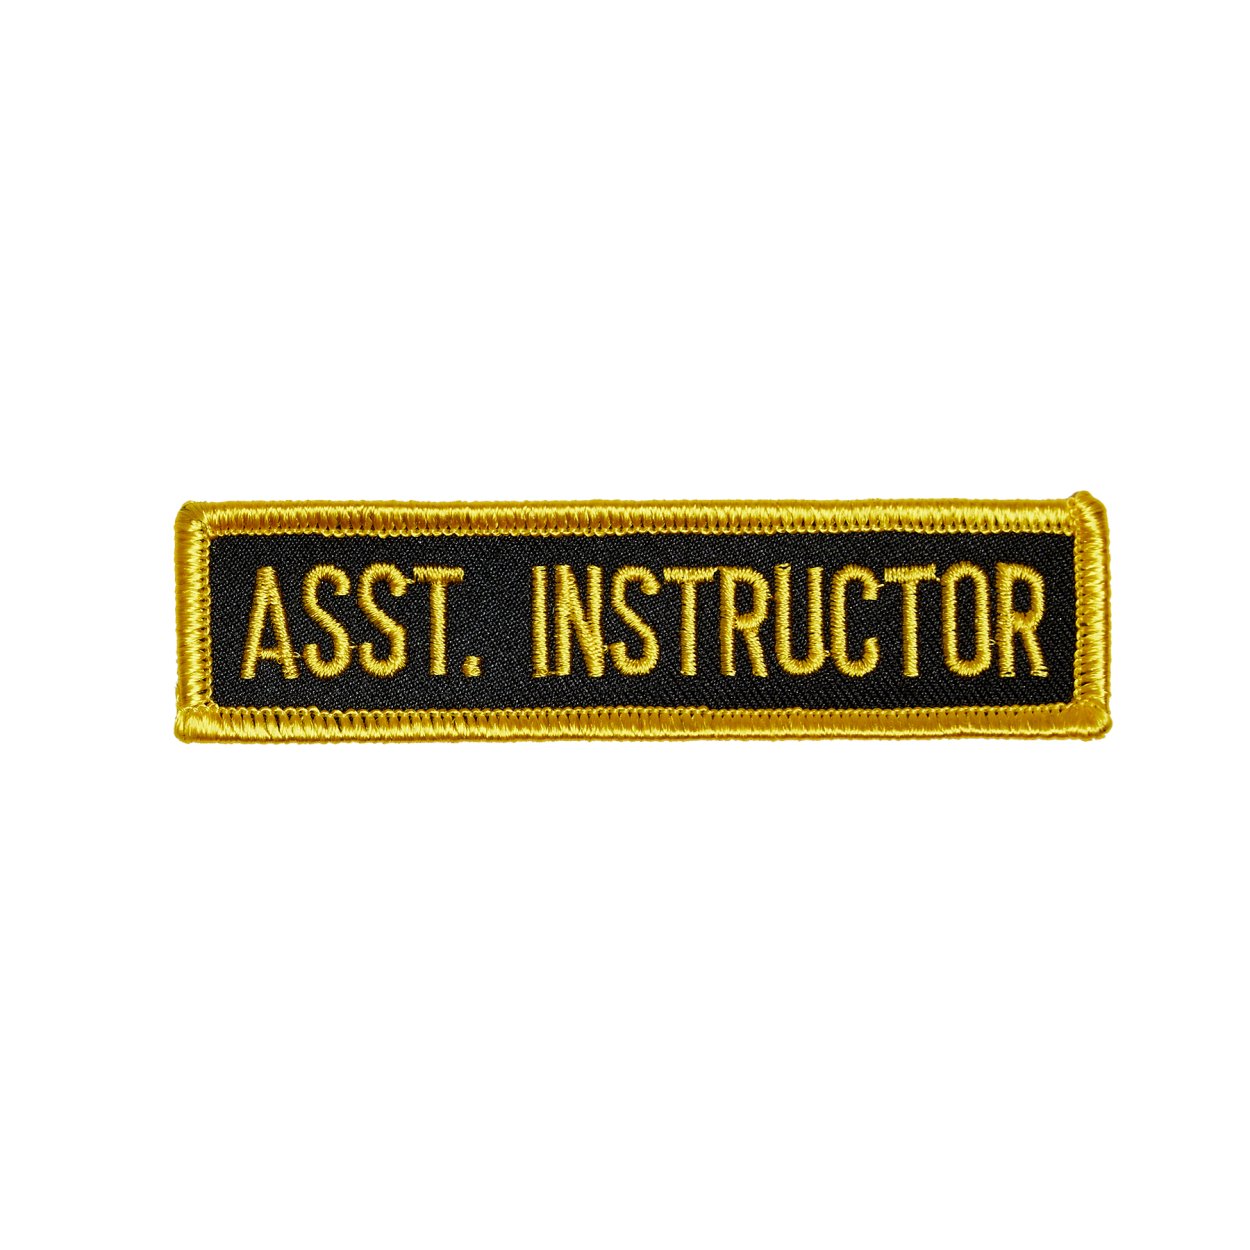 Assistant Instructor Patch 44 - Click Image to Close